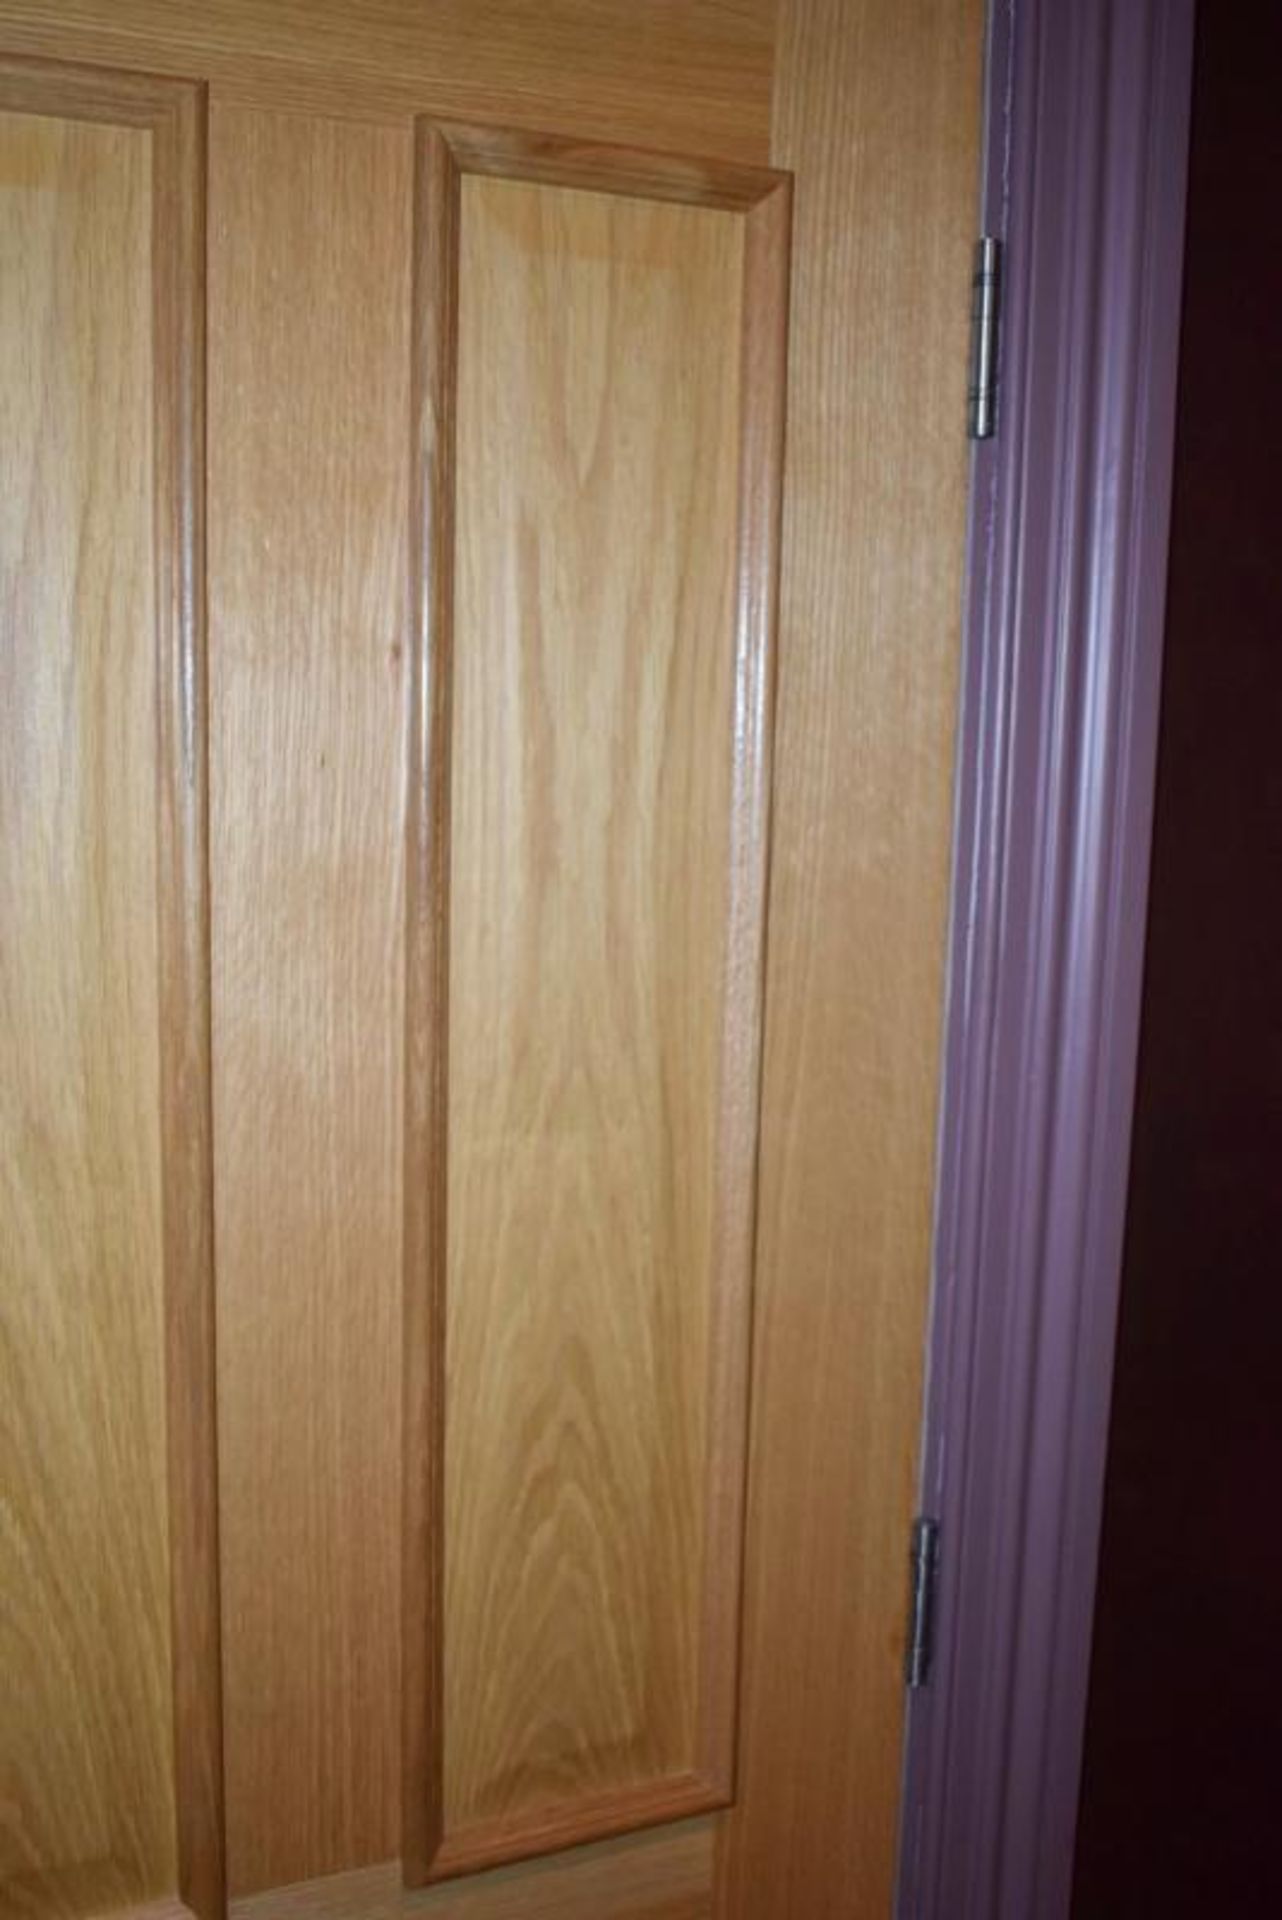 A Pair Of High Quality Internal Wooden Doors - Dimensions Of Each: H200 x W75 x 7cm - Ref: ABR016 / - Image 4 of 5